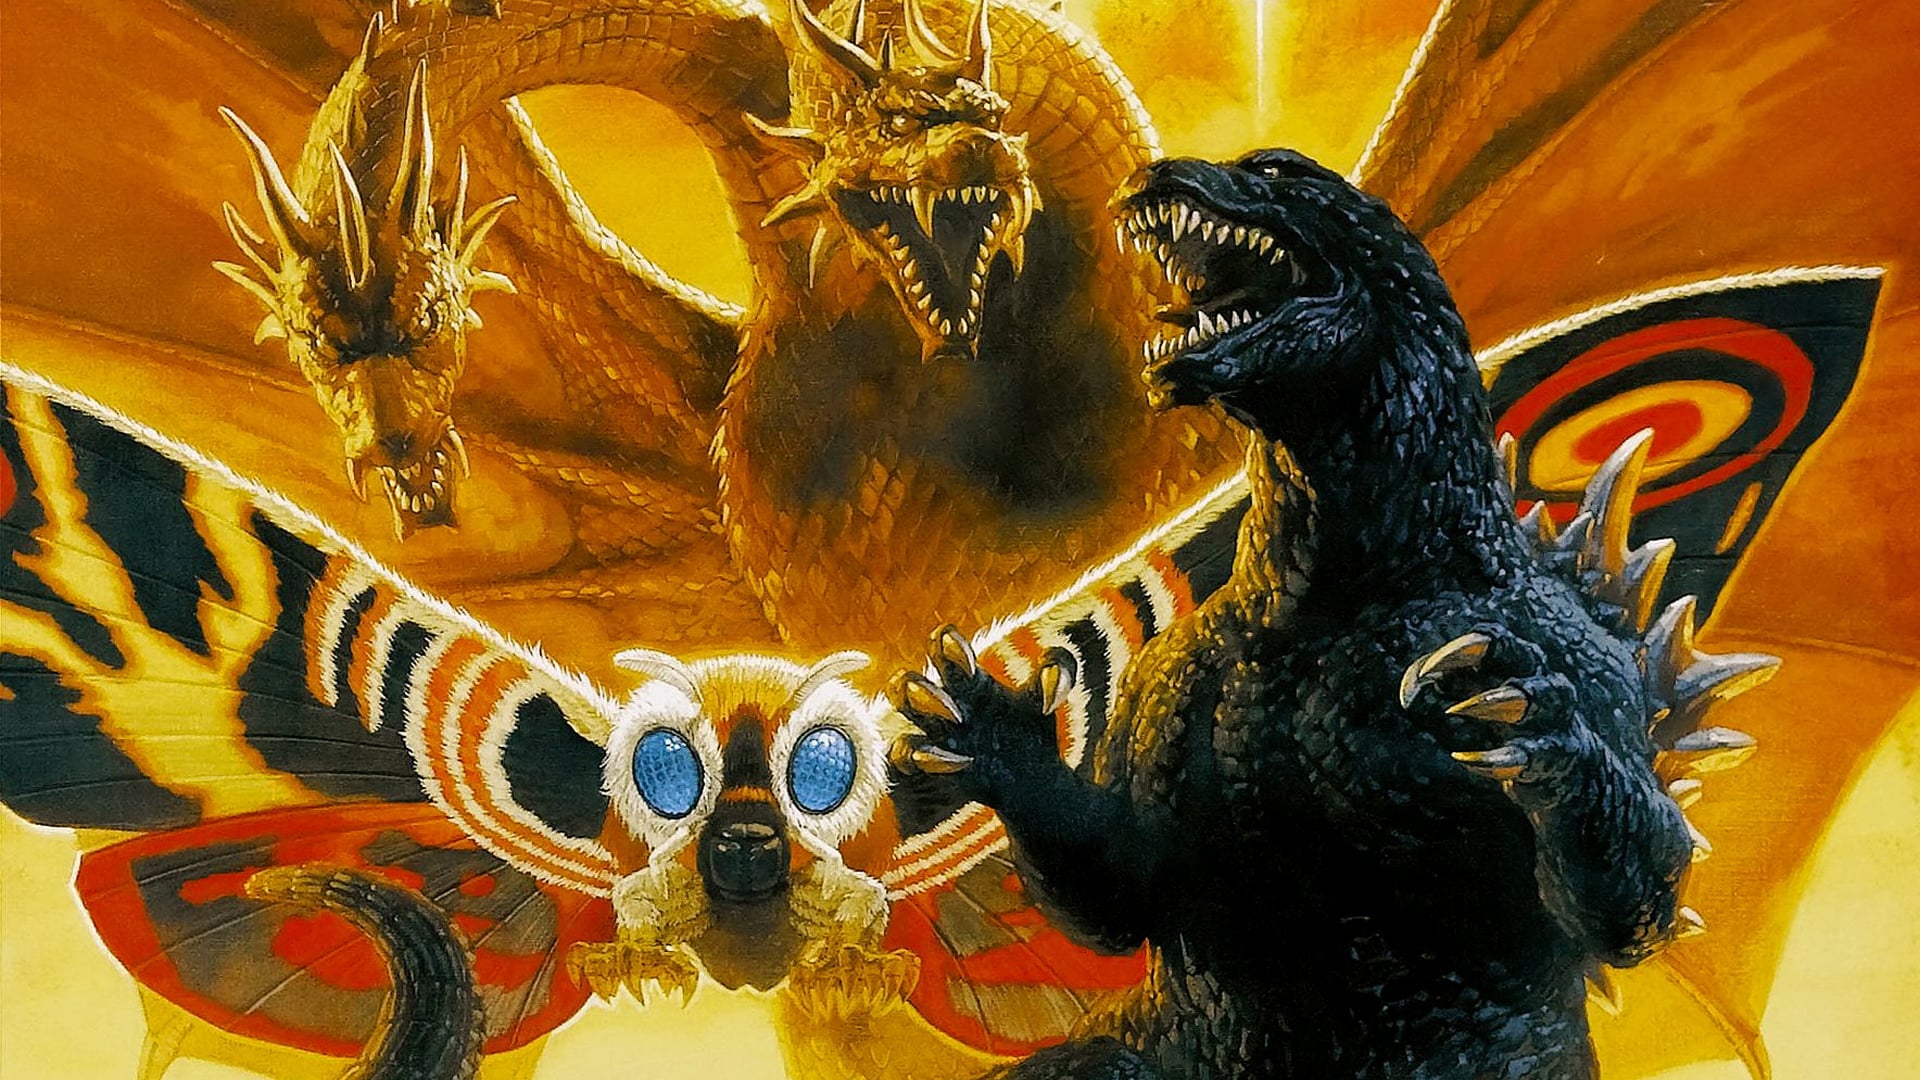 Godzilla, Mothra and King Ghidorah: Giant Monsters All-Out Attack 2001.